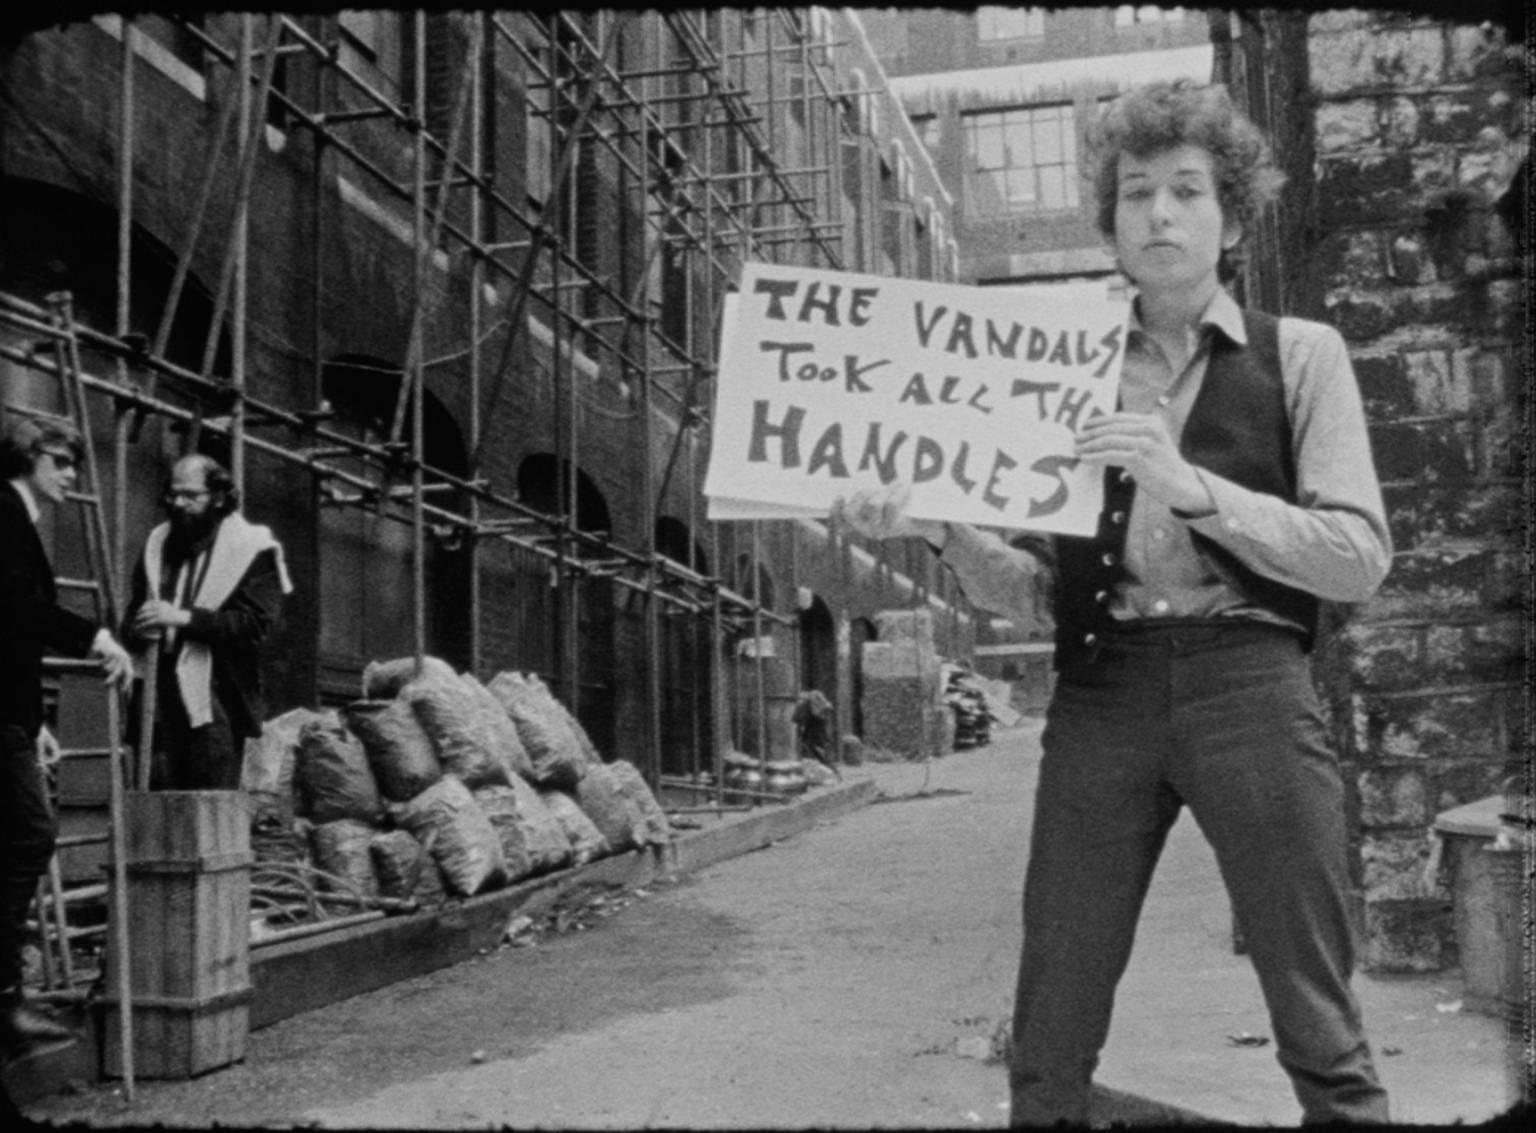 Bob Dylan in cue card scene "The Vandals"  1965 - Mixed Media Art by D.A. Pennebaker